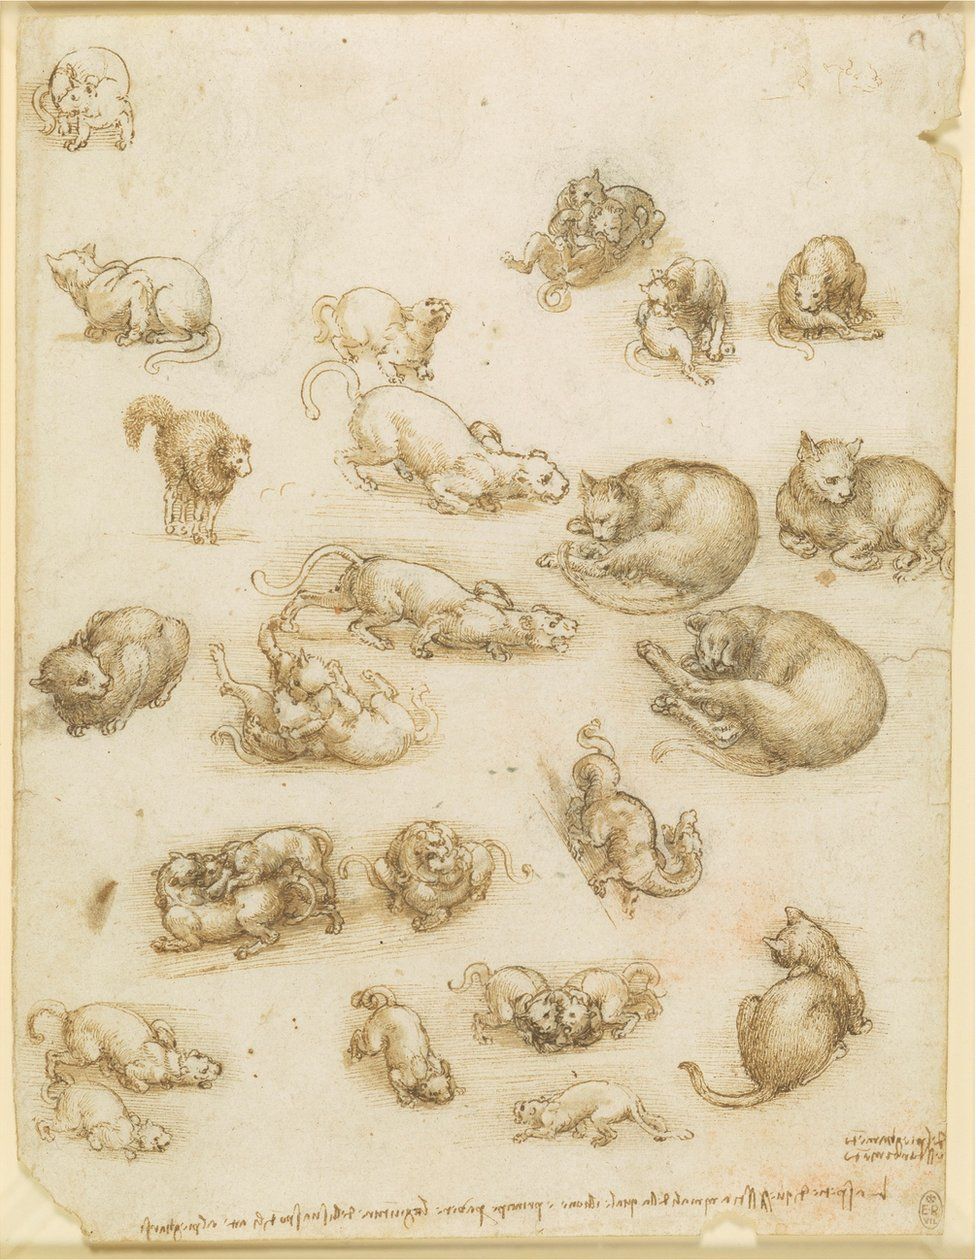 A drawing showing cats, lions and a dragon by Leonardo da Vinci